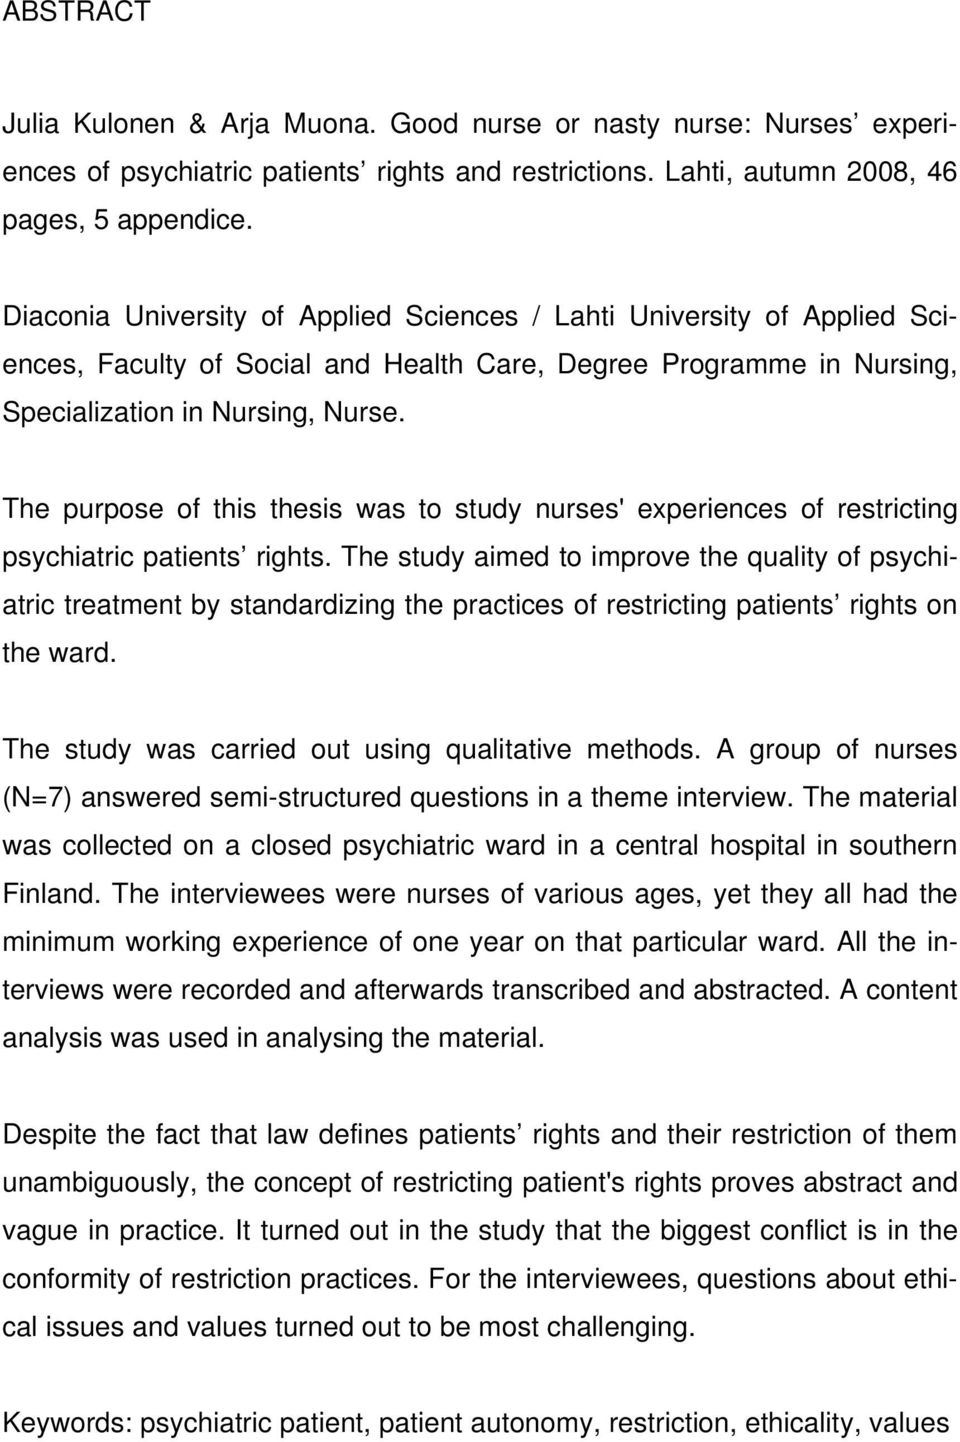 The purpose of this thesis was to study nurses' experiences of restricting psychiatric patients rights.